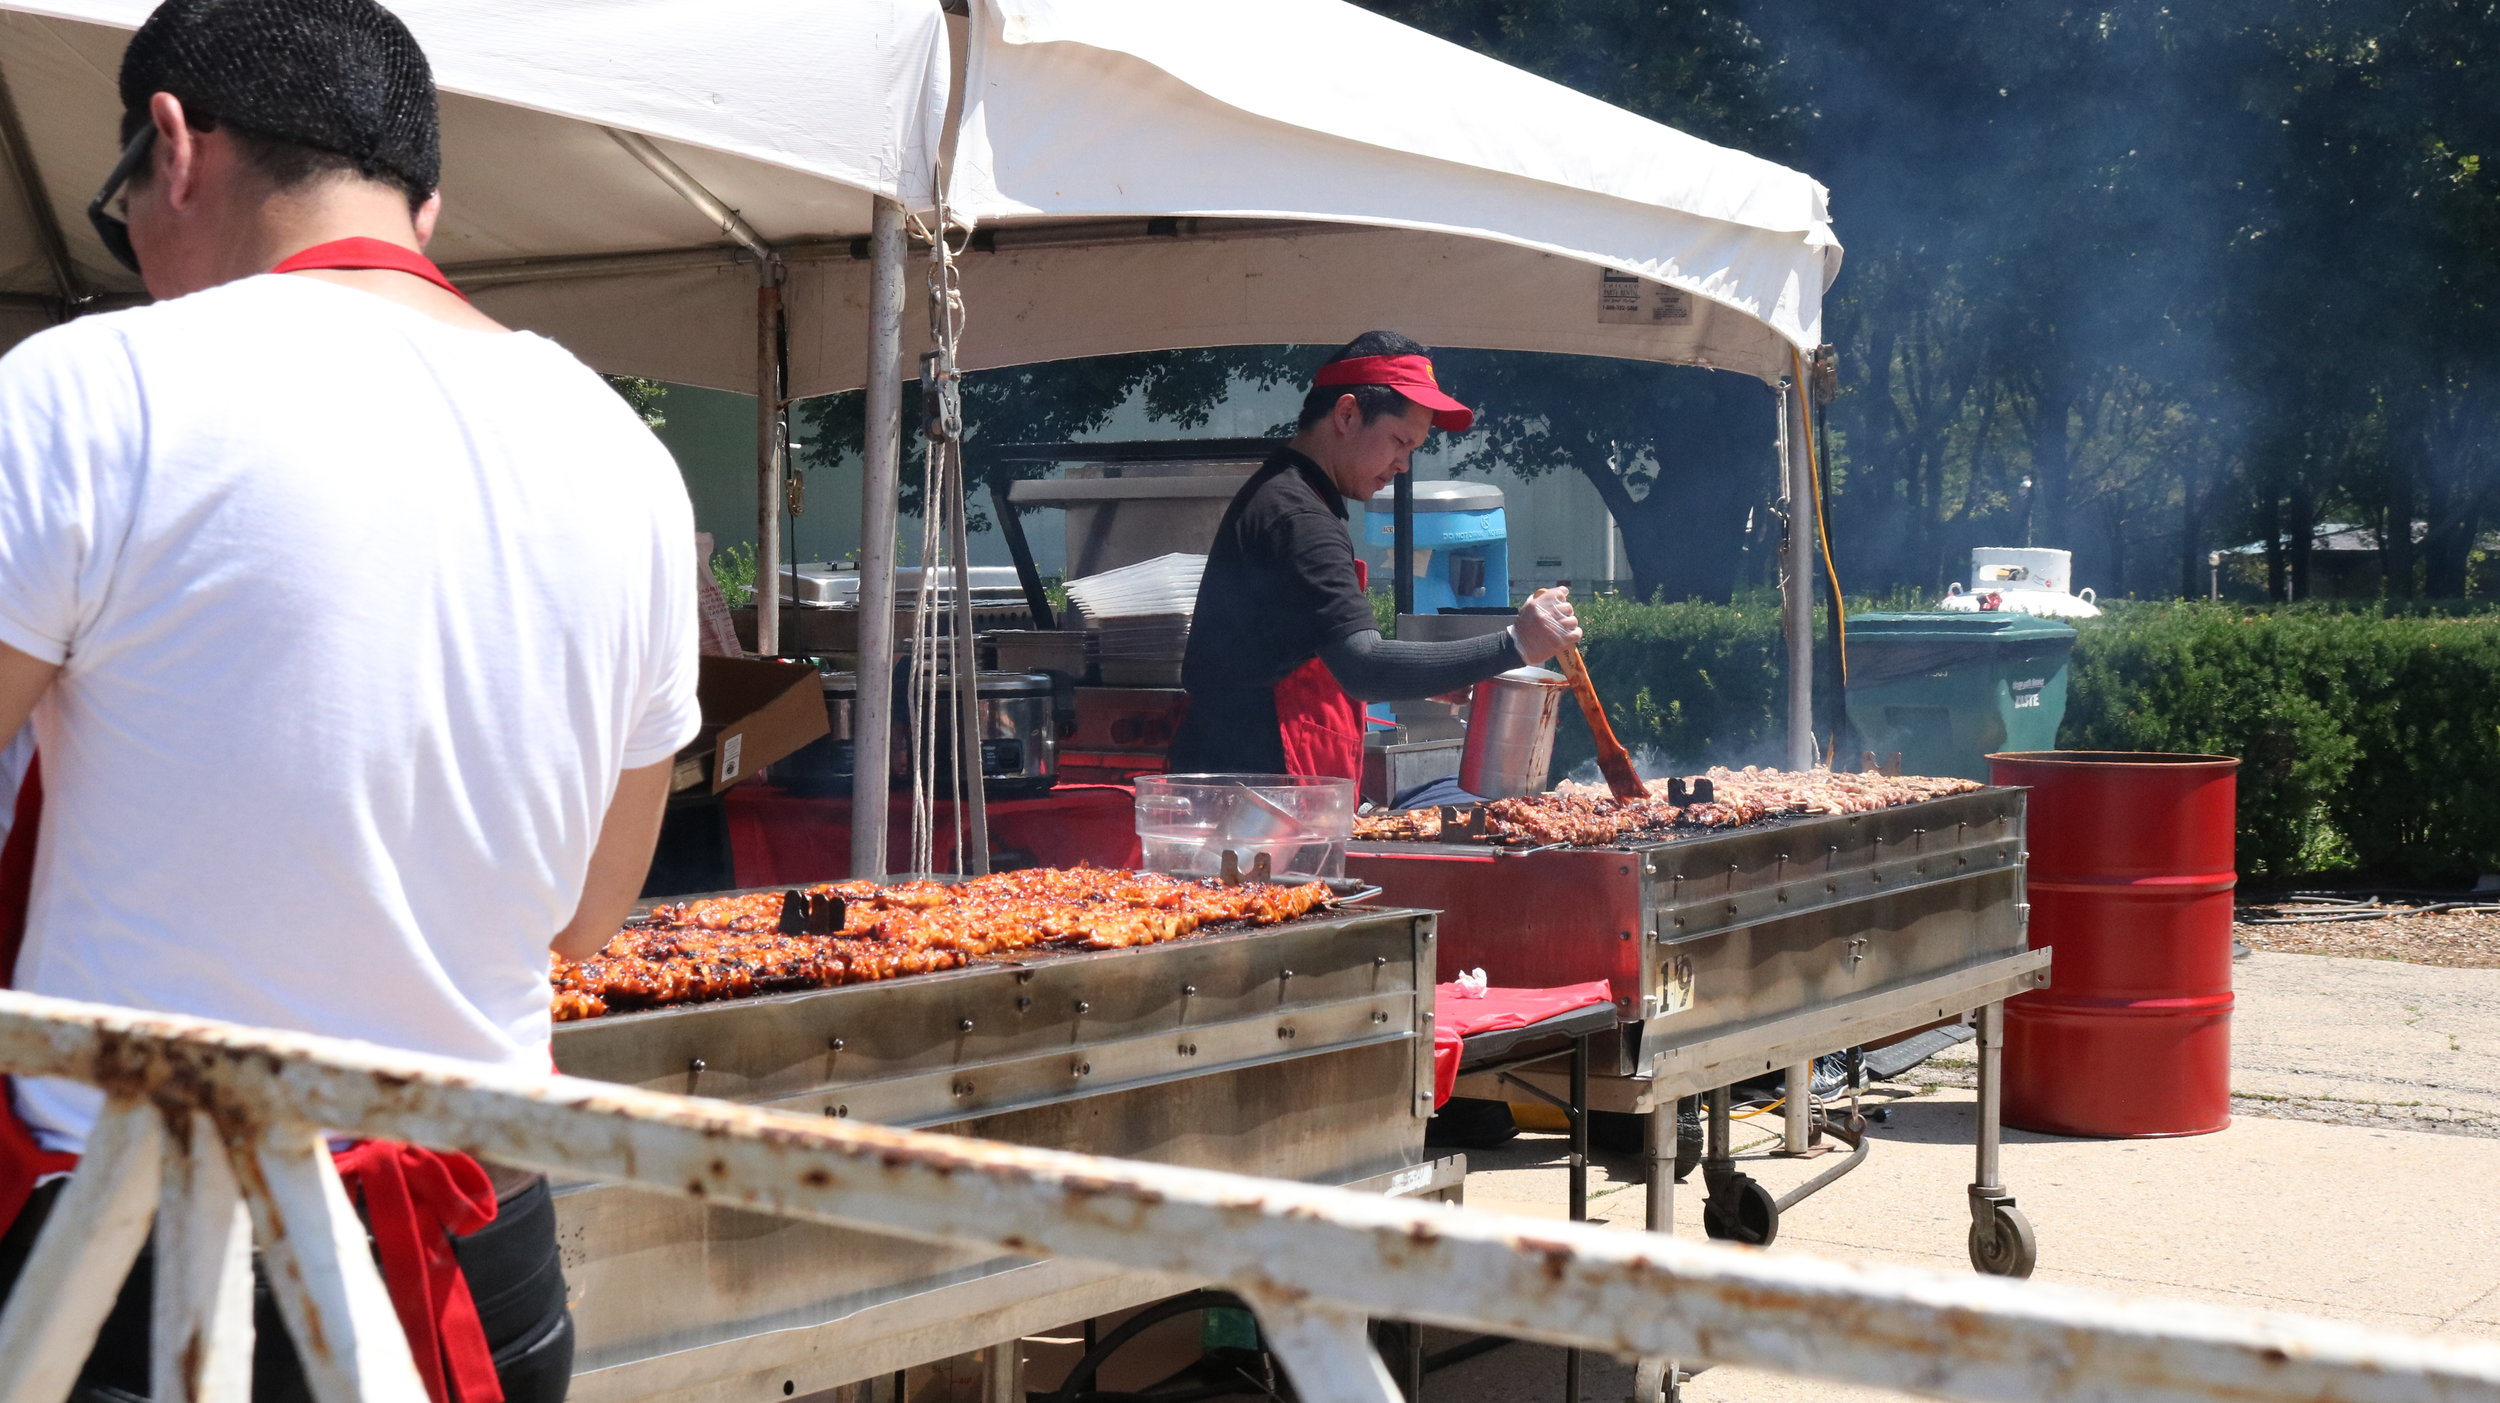  Grill City’s Cook preparing Chicken BBQ on Stick during the first day of the Taste of Chicago. Photo by Clariza Adao  